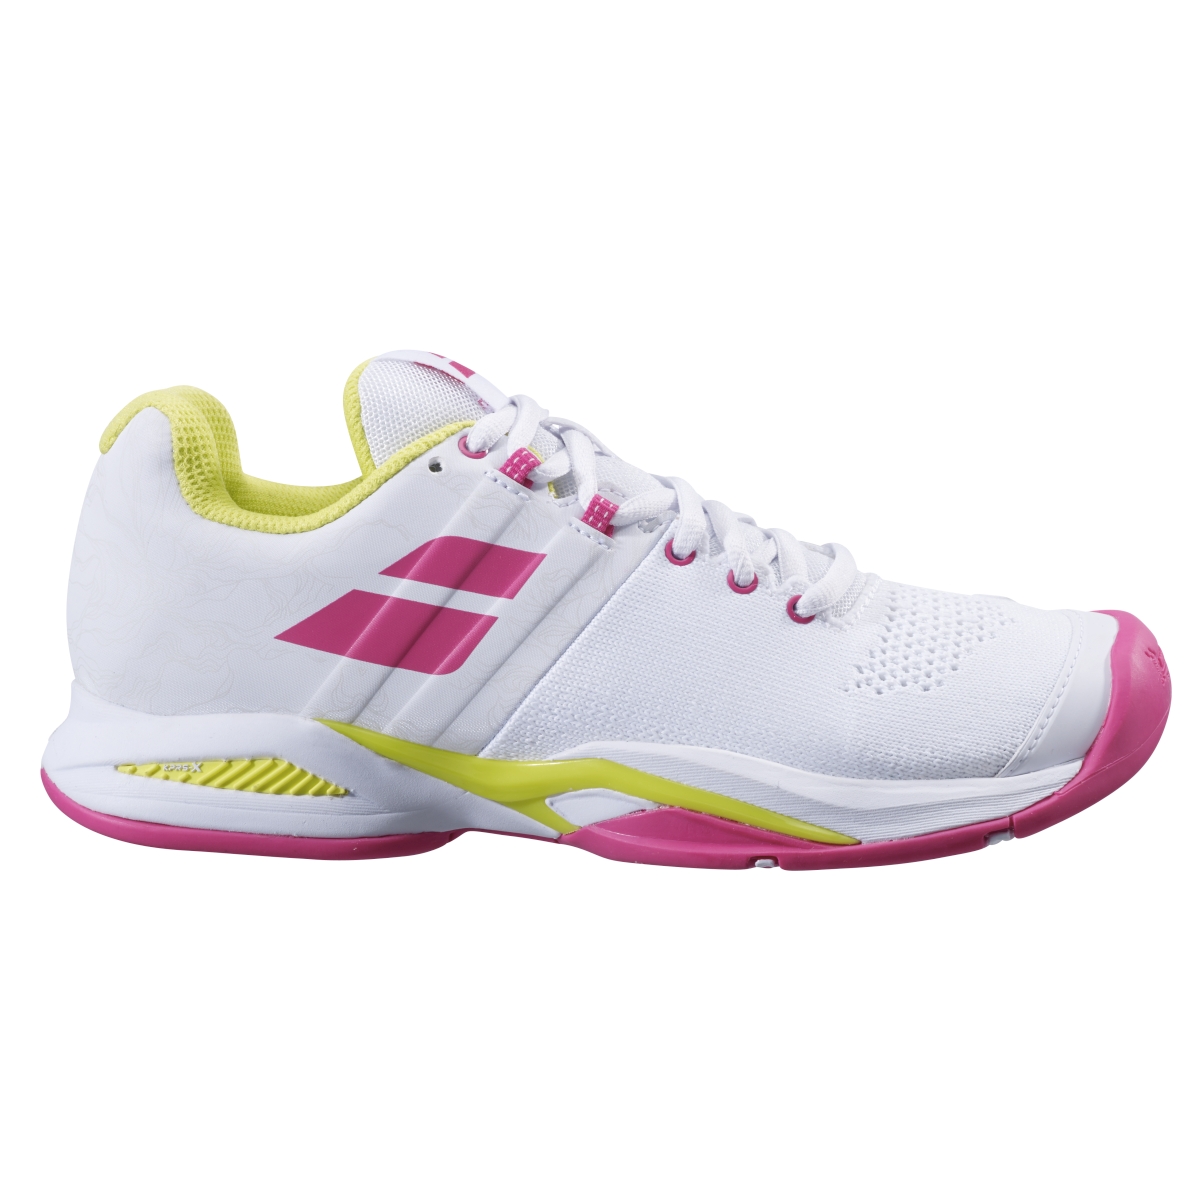 Babolat Women's Propulse Blast All Court Tennis Shoes (White/Red Rose)